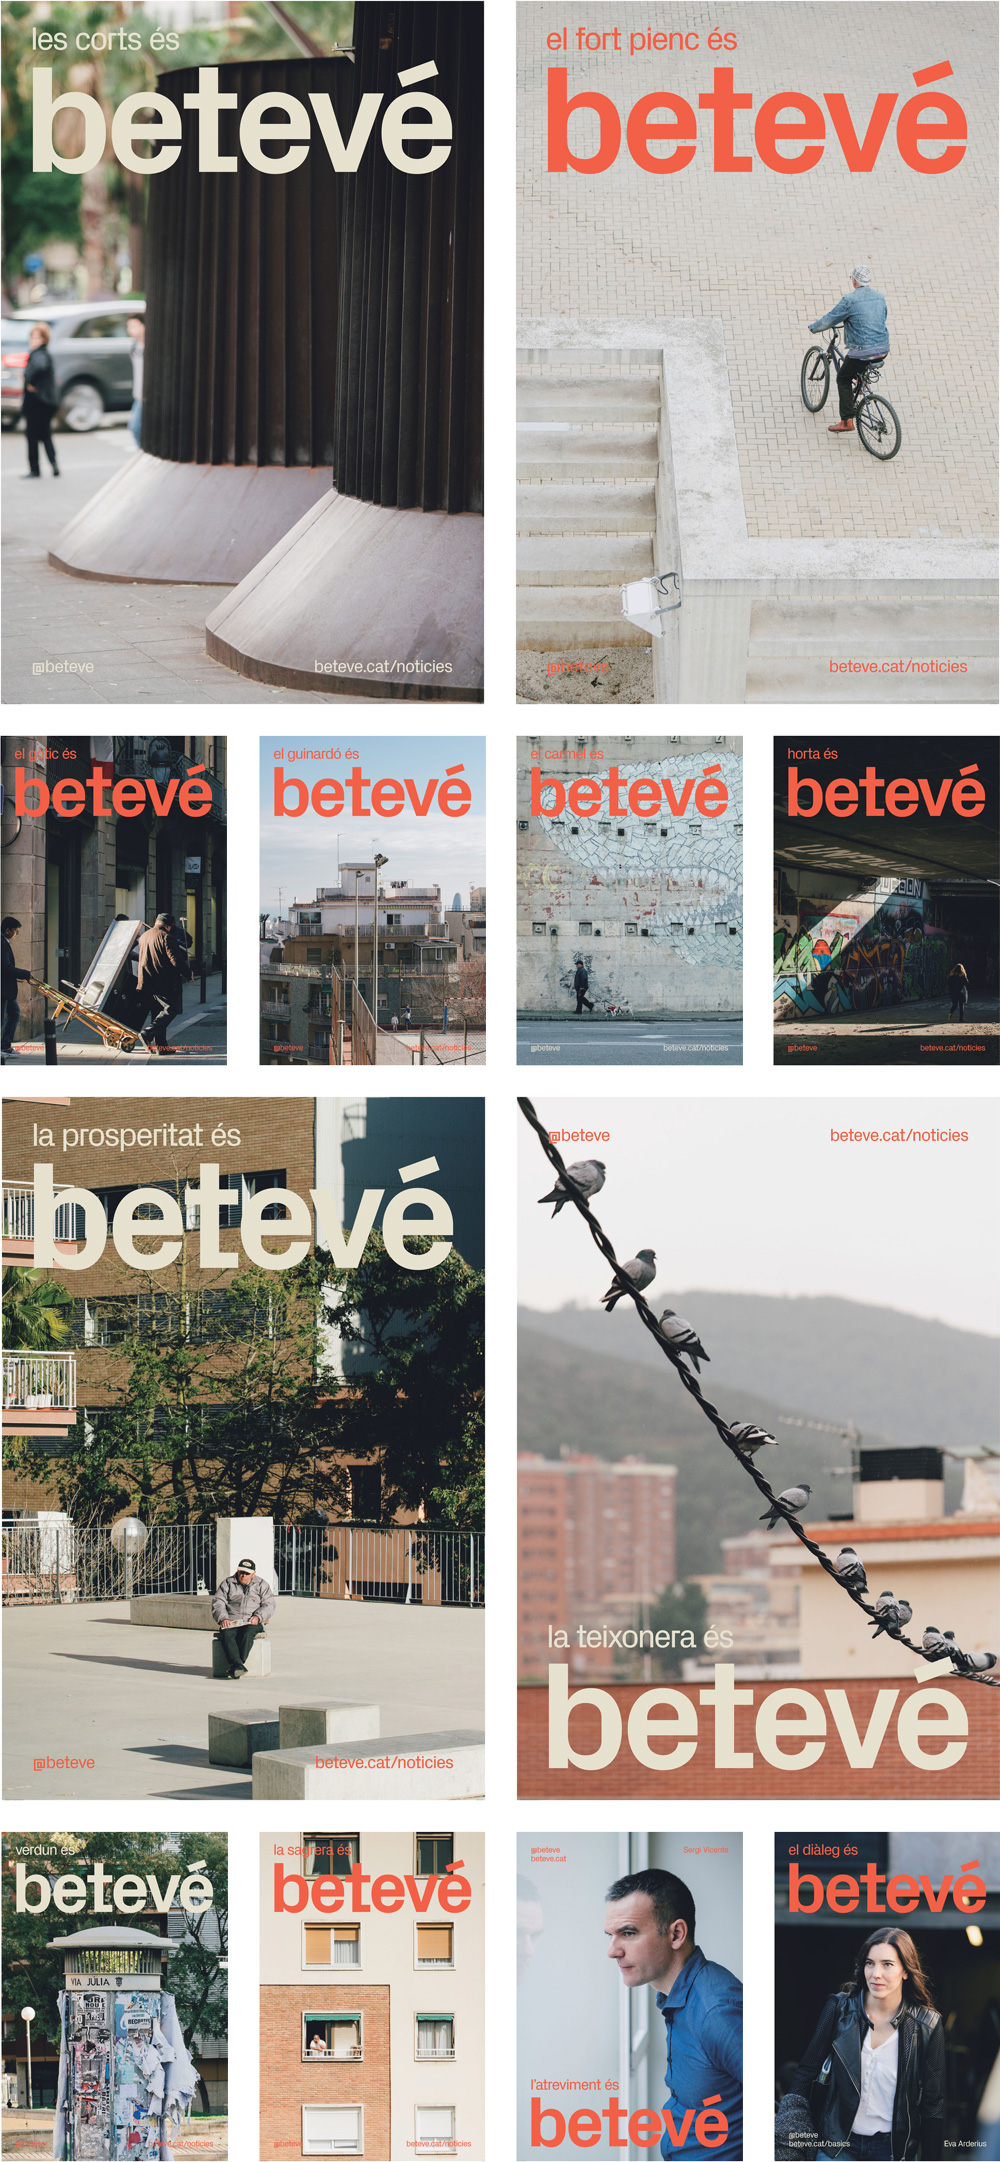 New Logo, Identity, and On-air Look for betevé by Folch